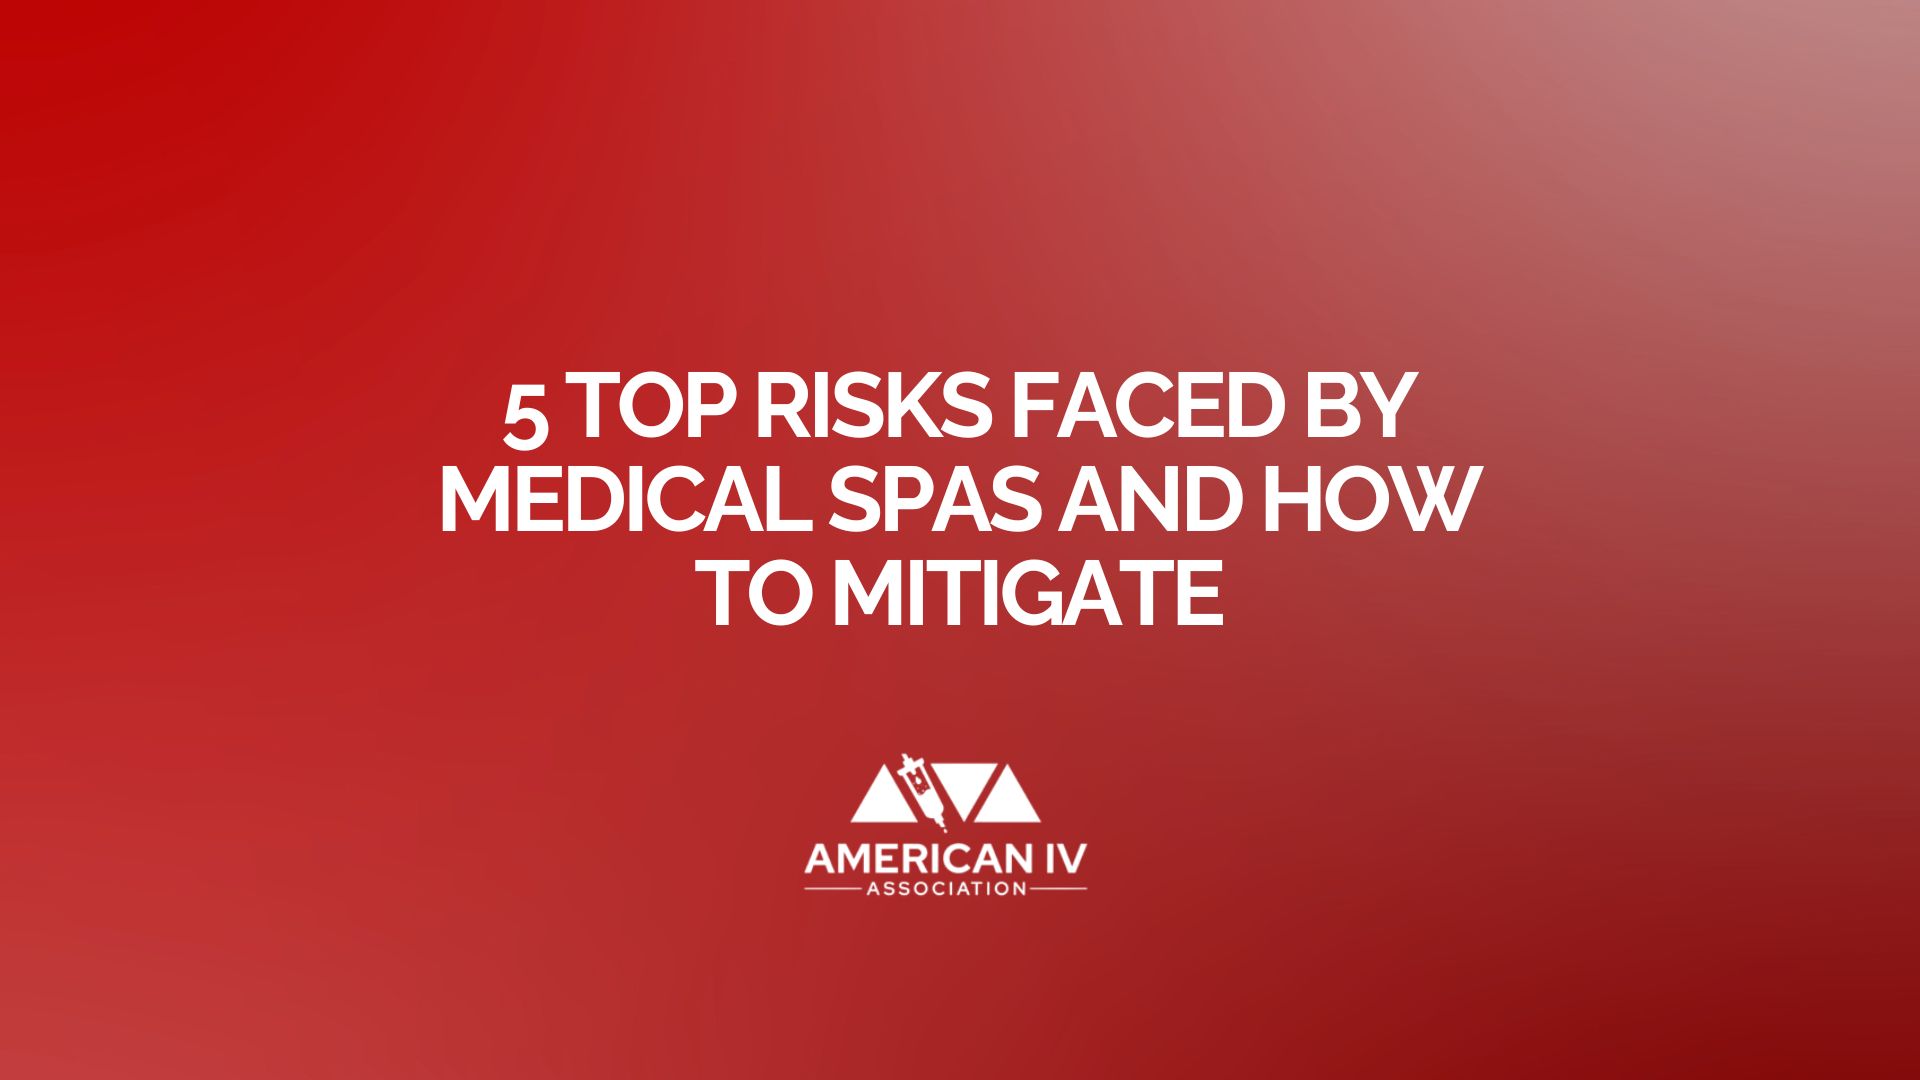 5 top risks faced by medical spas and how to mitigate them